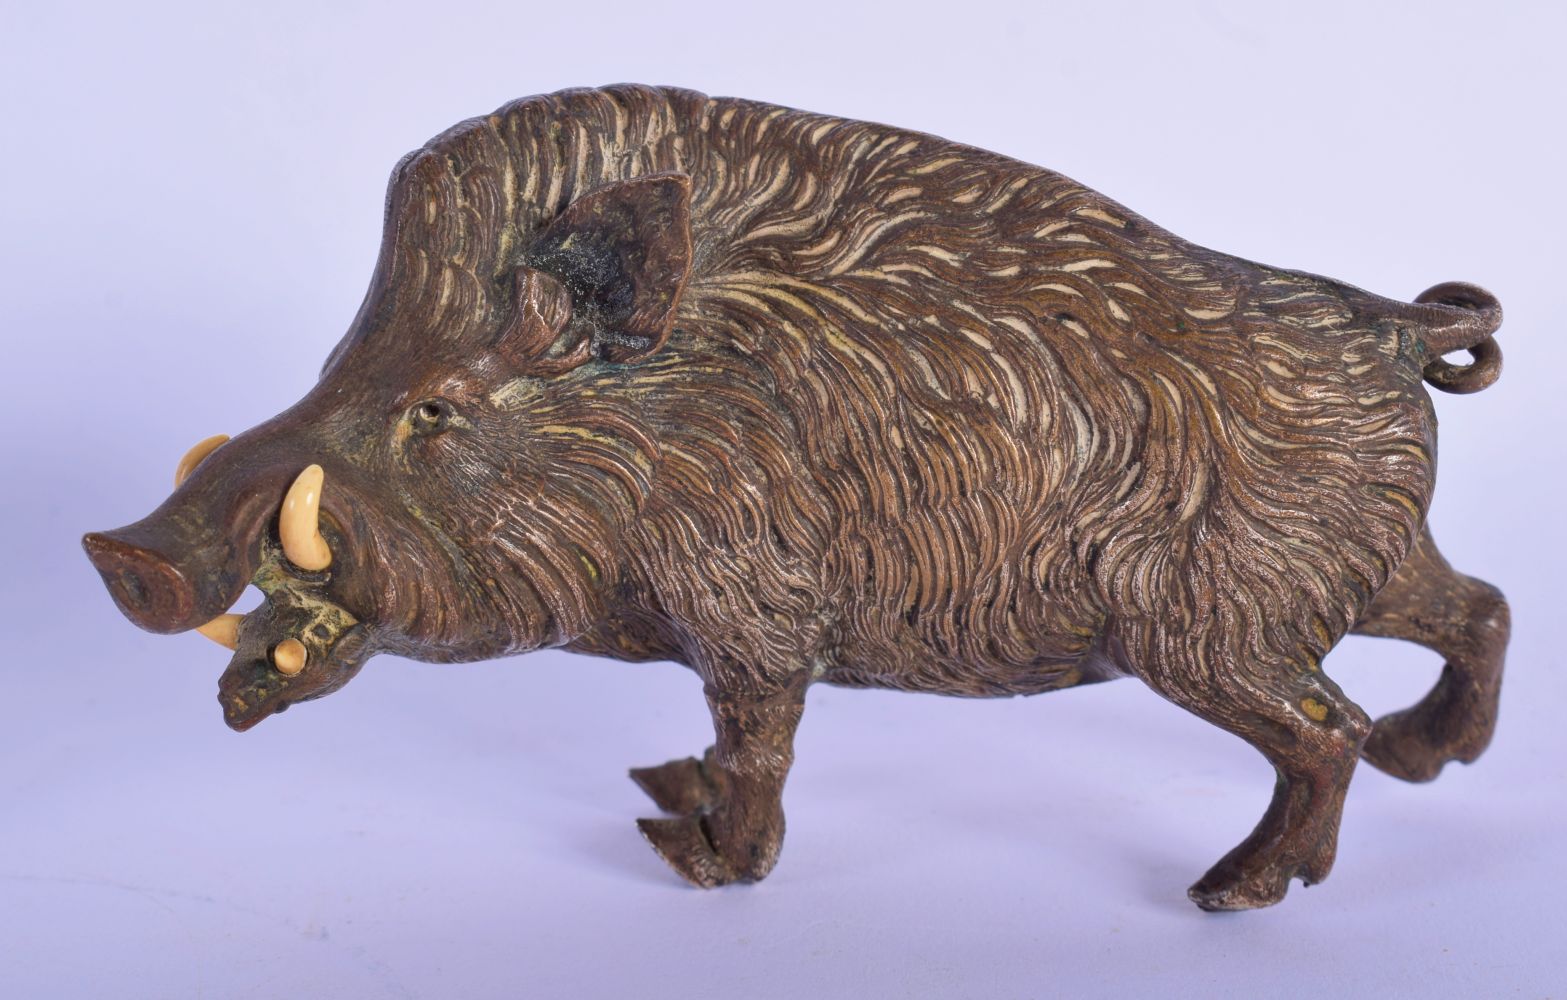 A 19TH CENTURY AUSTRIAN COLD PAINTED BRONZE FIGURE OF A HOG modelled with ivory tusks. 8 cm x 11 cm.